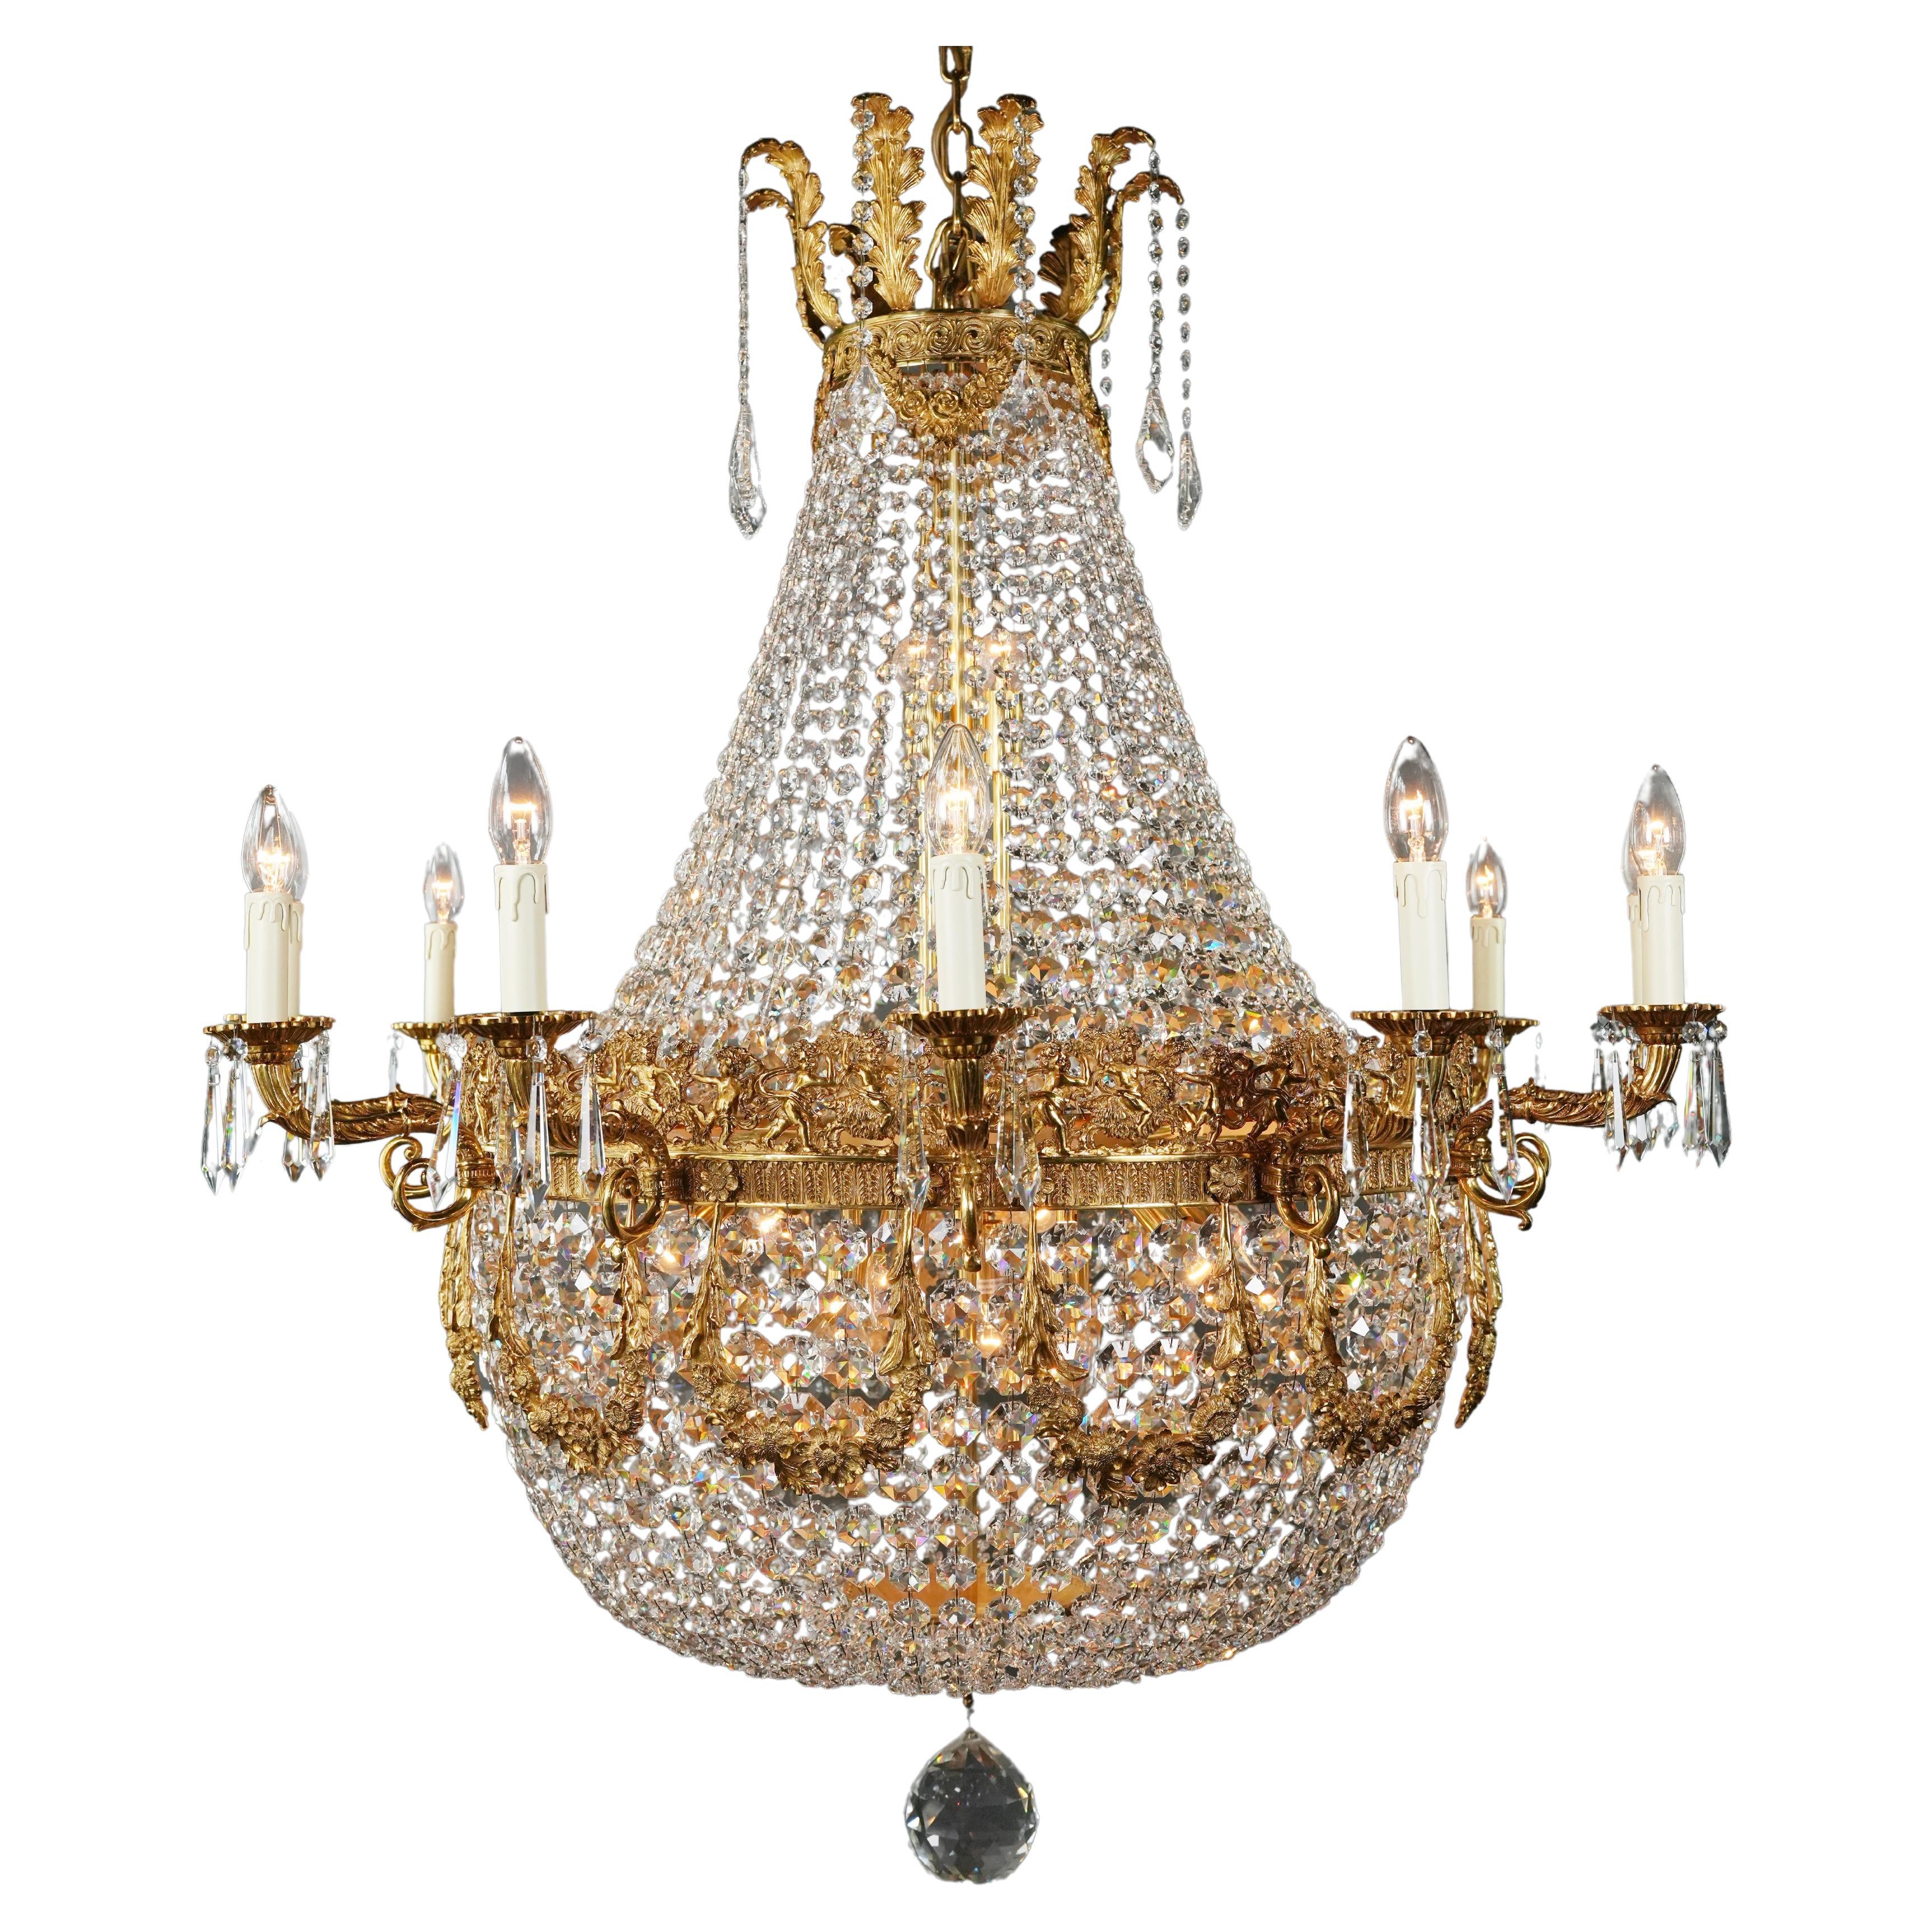 Wreat Brass Basket Empire Sac a Pearl Chandelier Crystal and Antique Gold For Sale